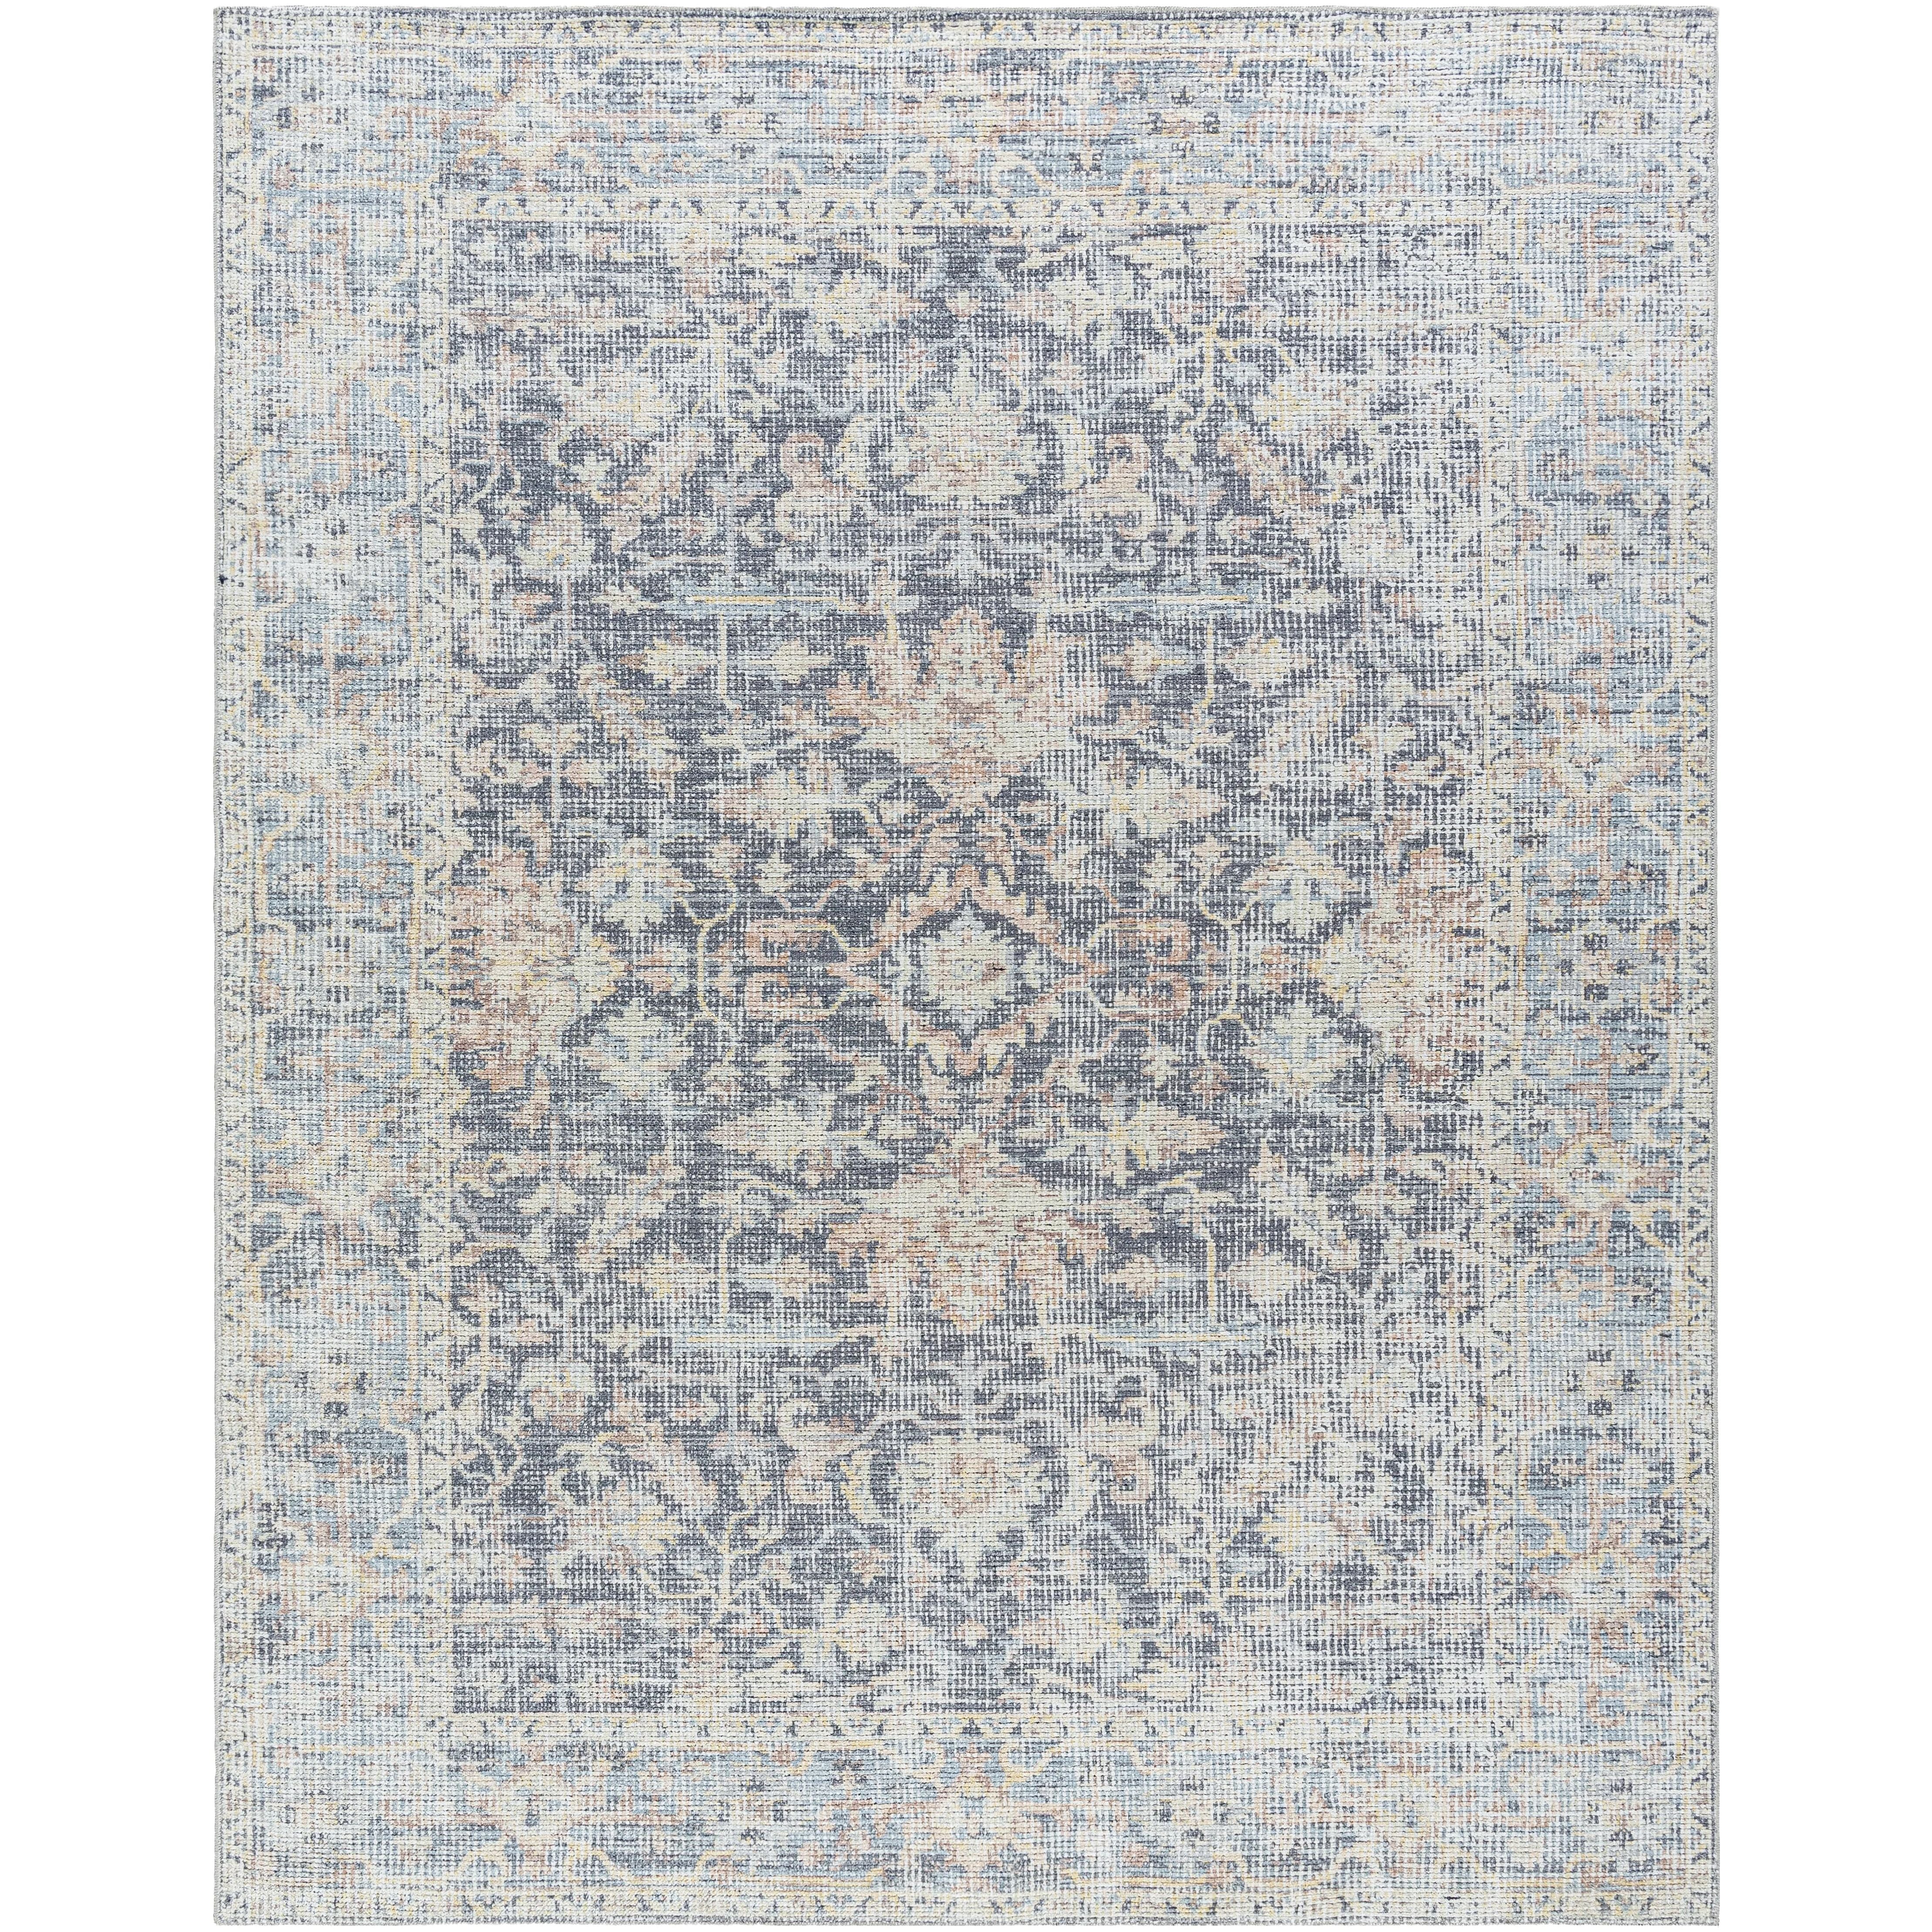 PNW Home x Surya available at Amethyst Home shipping to Australia, UK, and Canada. Organic modern design with easy to clean rugs for a family home in  the Monterey metro area.